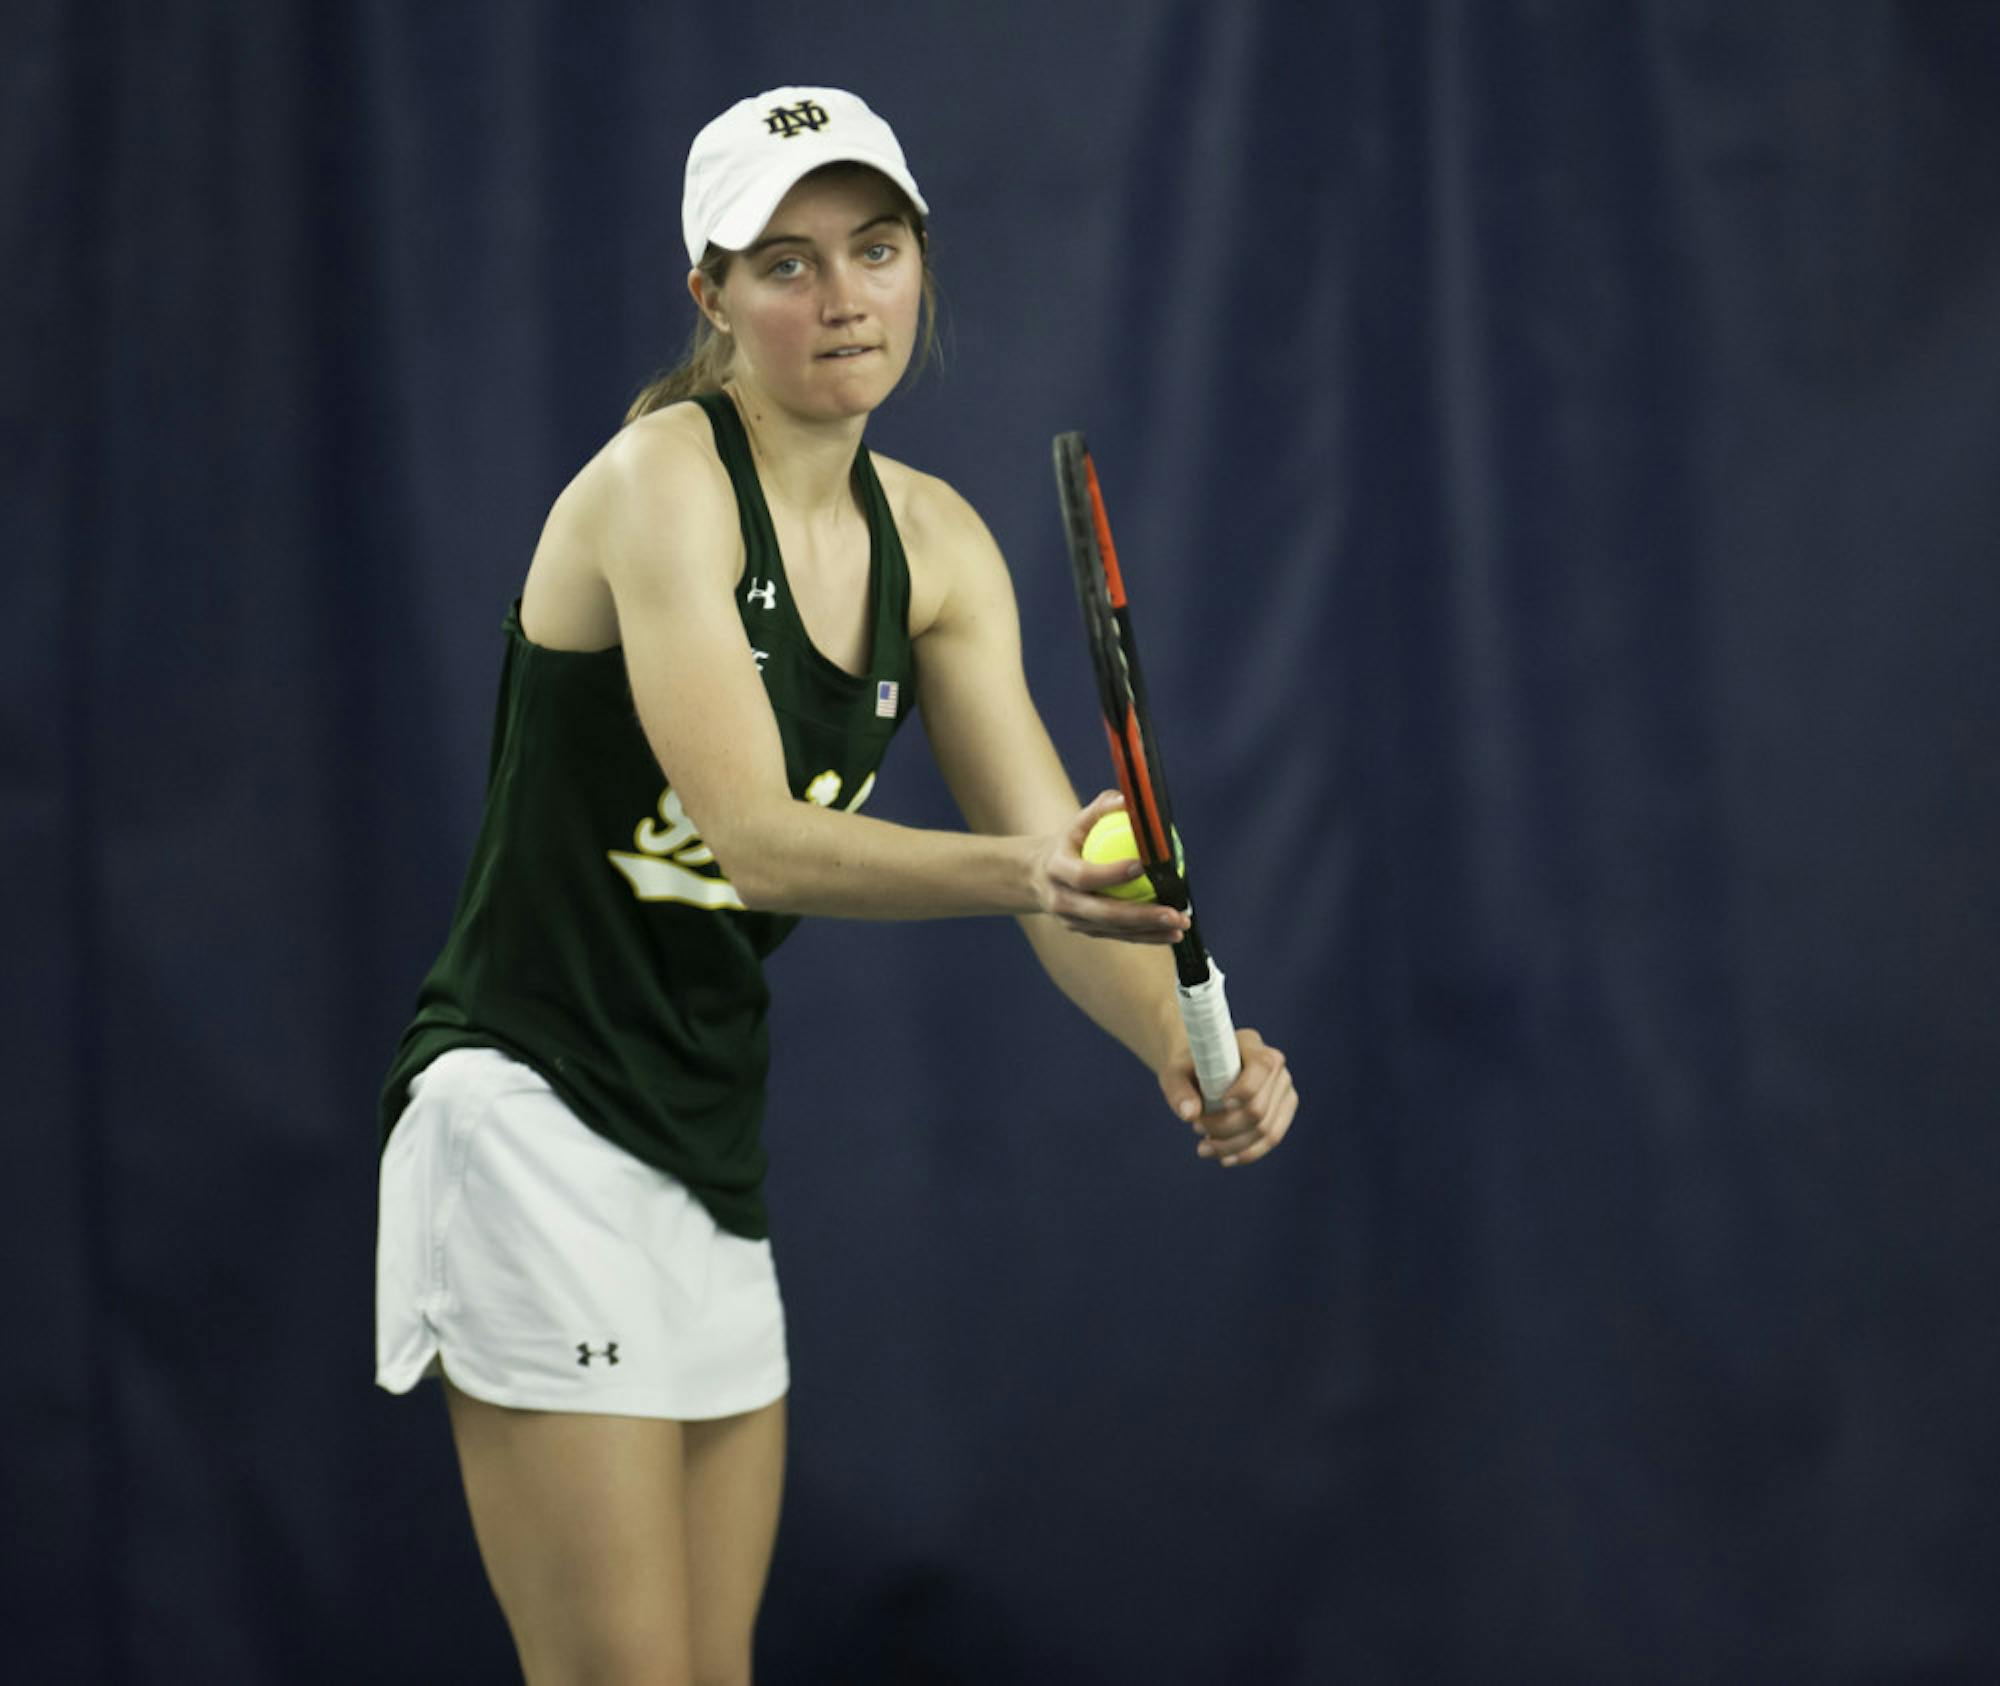 Irish senior Mary Closs prepares to serve the ball during Notre Dame's 5-2 win over Purdue on Feb. 22 at Eck Tennis Pavilion.